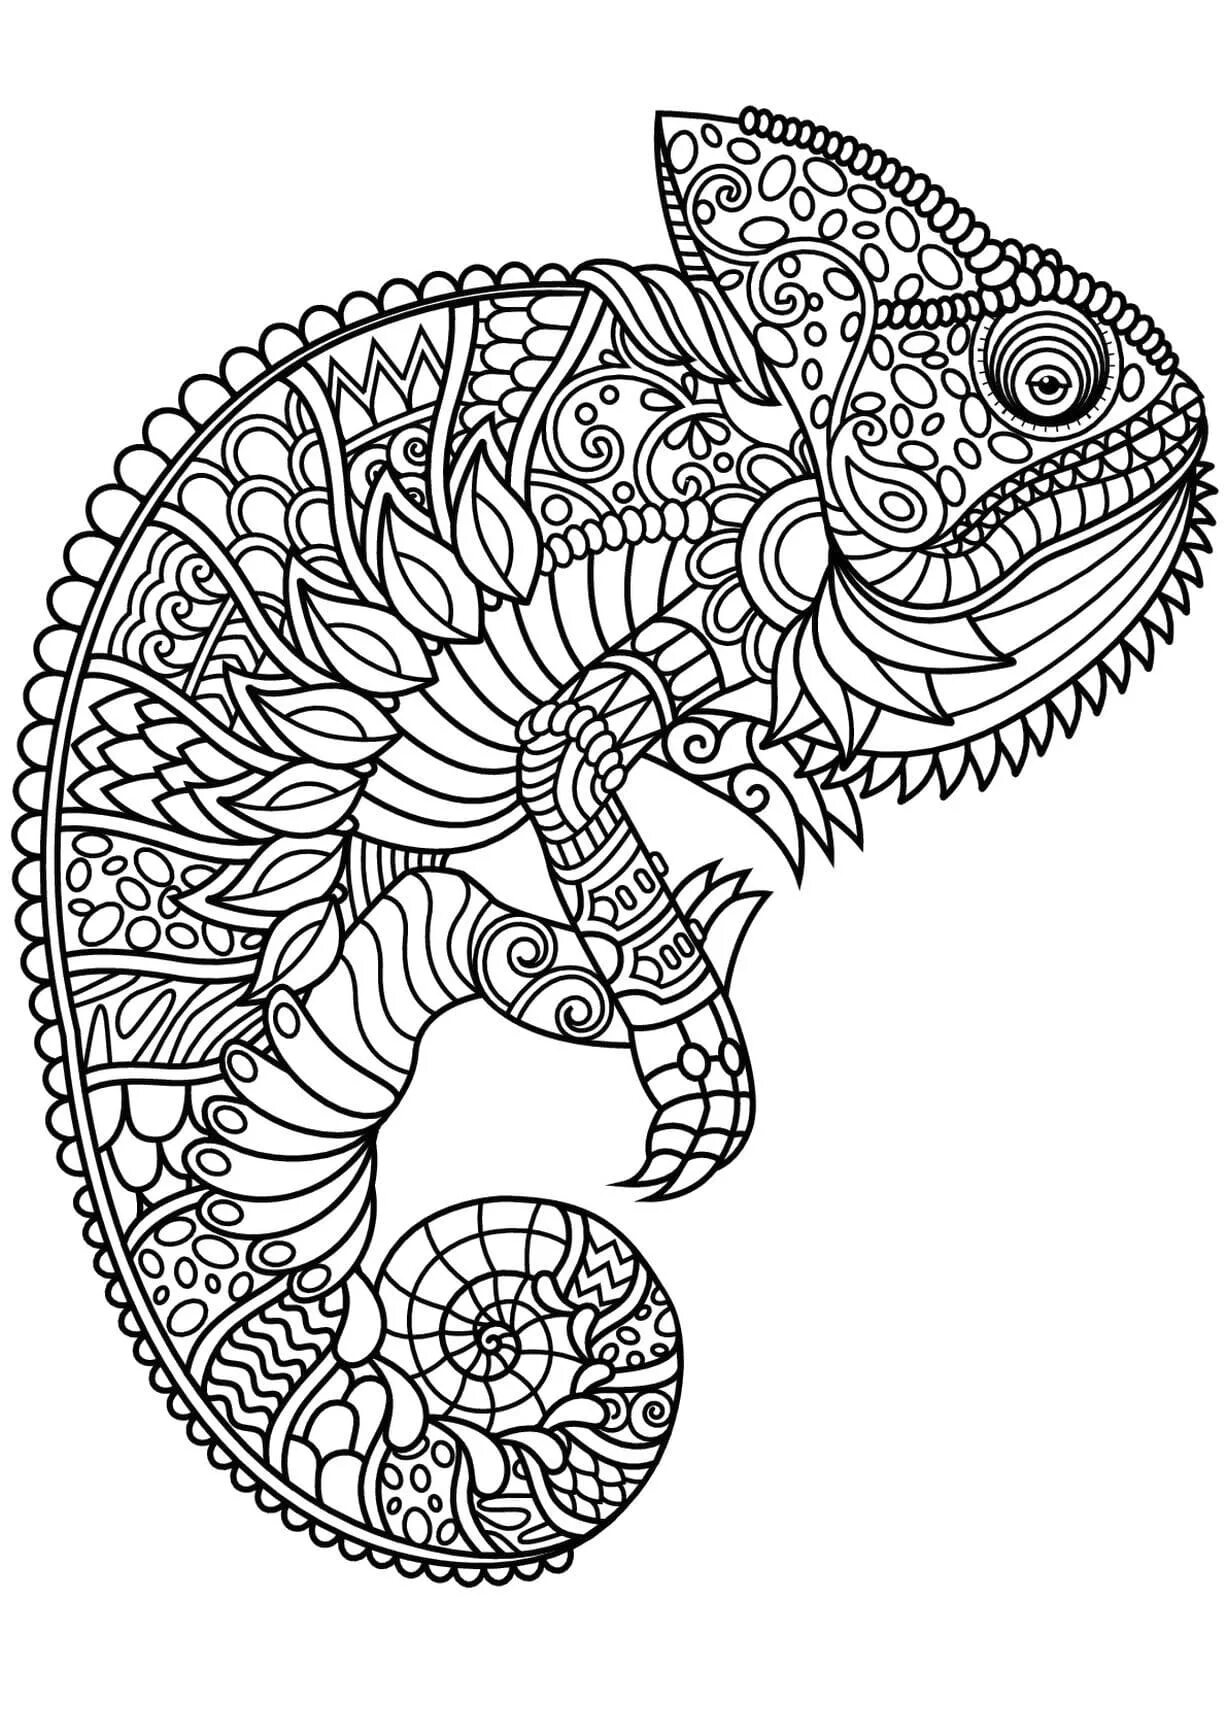 Easy coloring to relax the nervous system